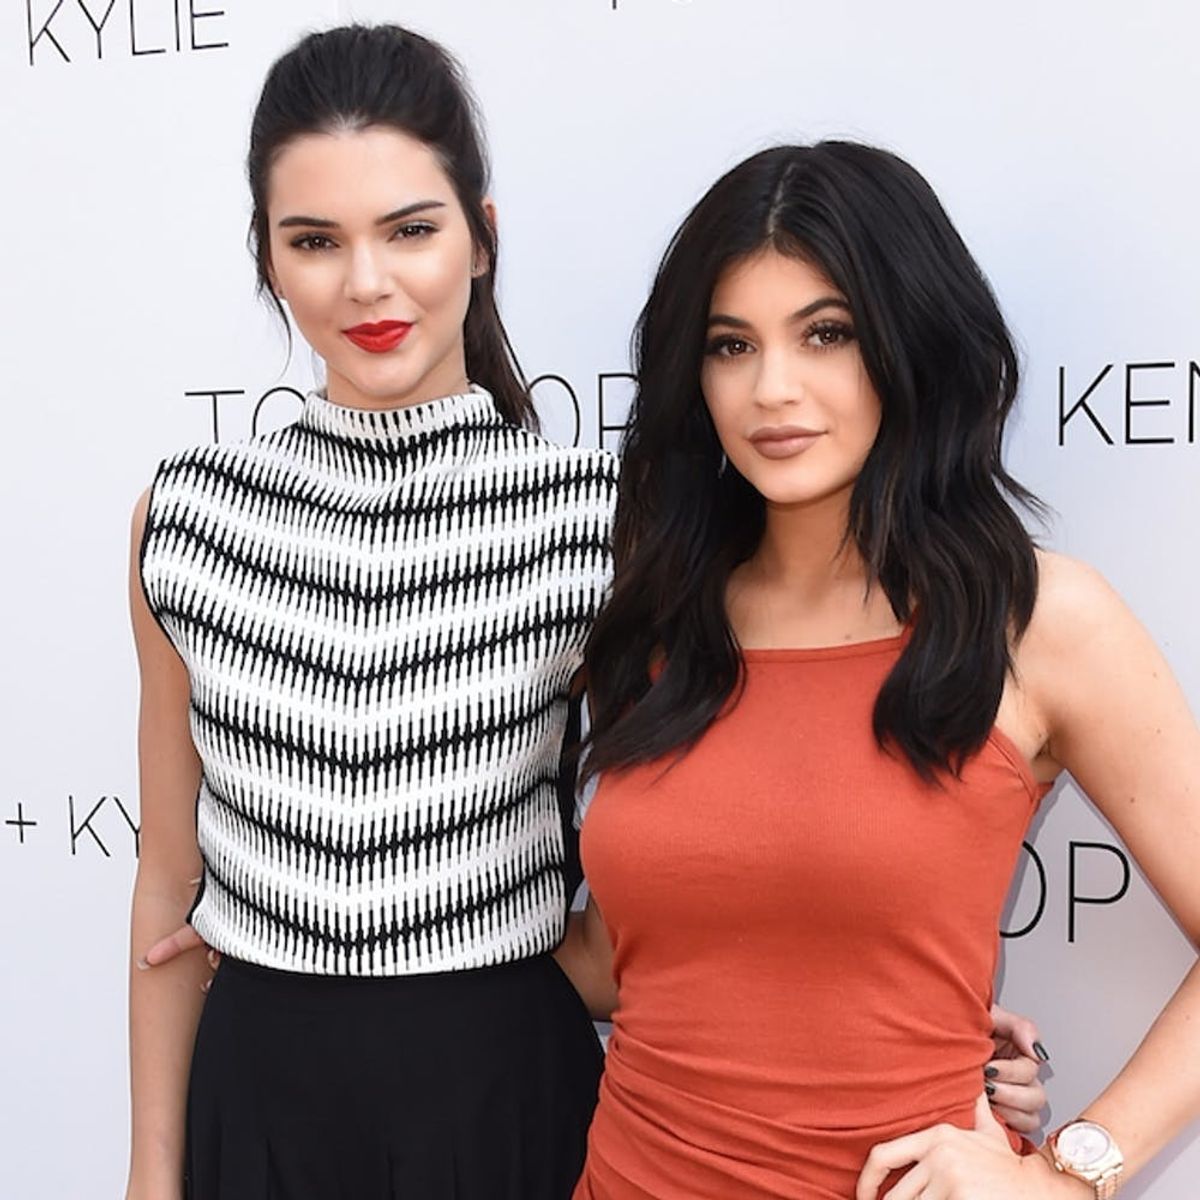 This Crazy Old Video Shows Kendall + Kylie Jenner as Totally Normal Tweens